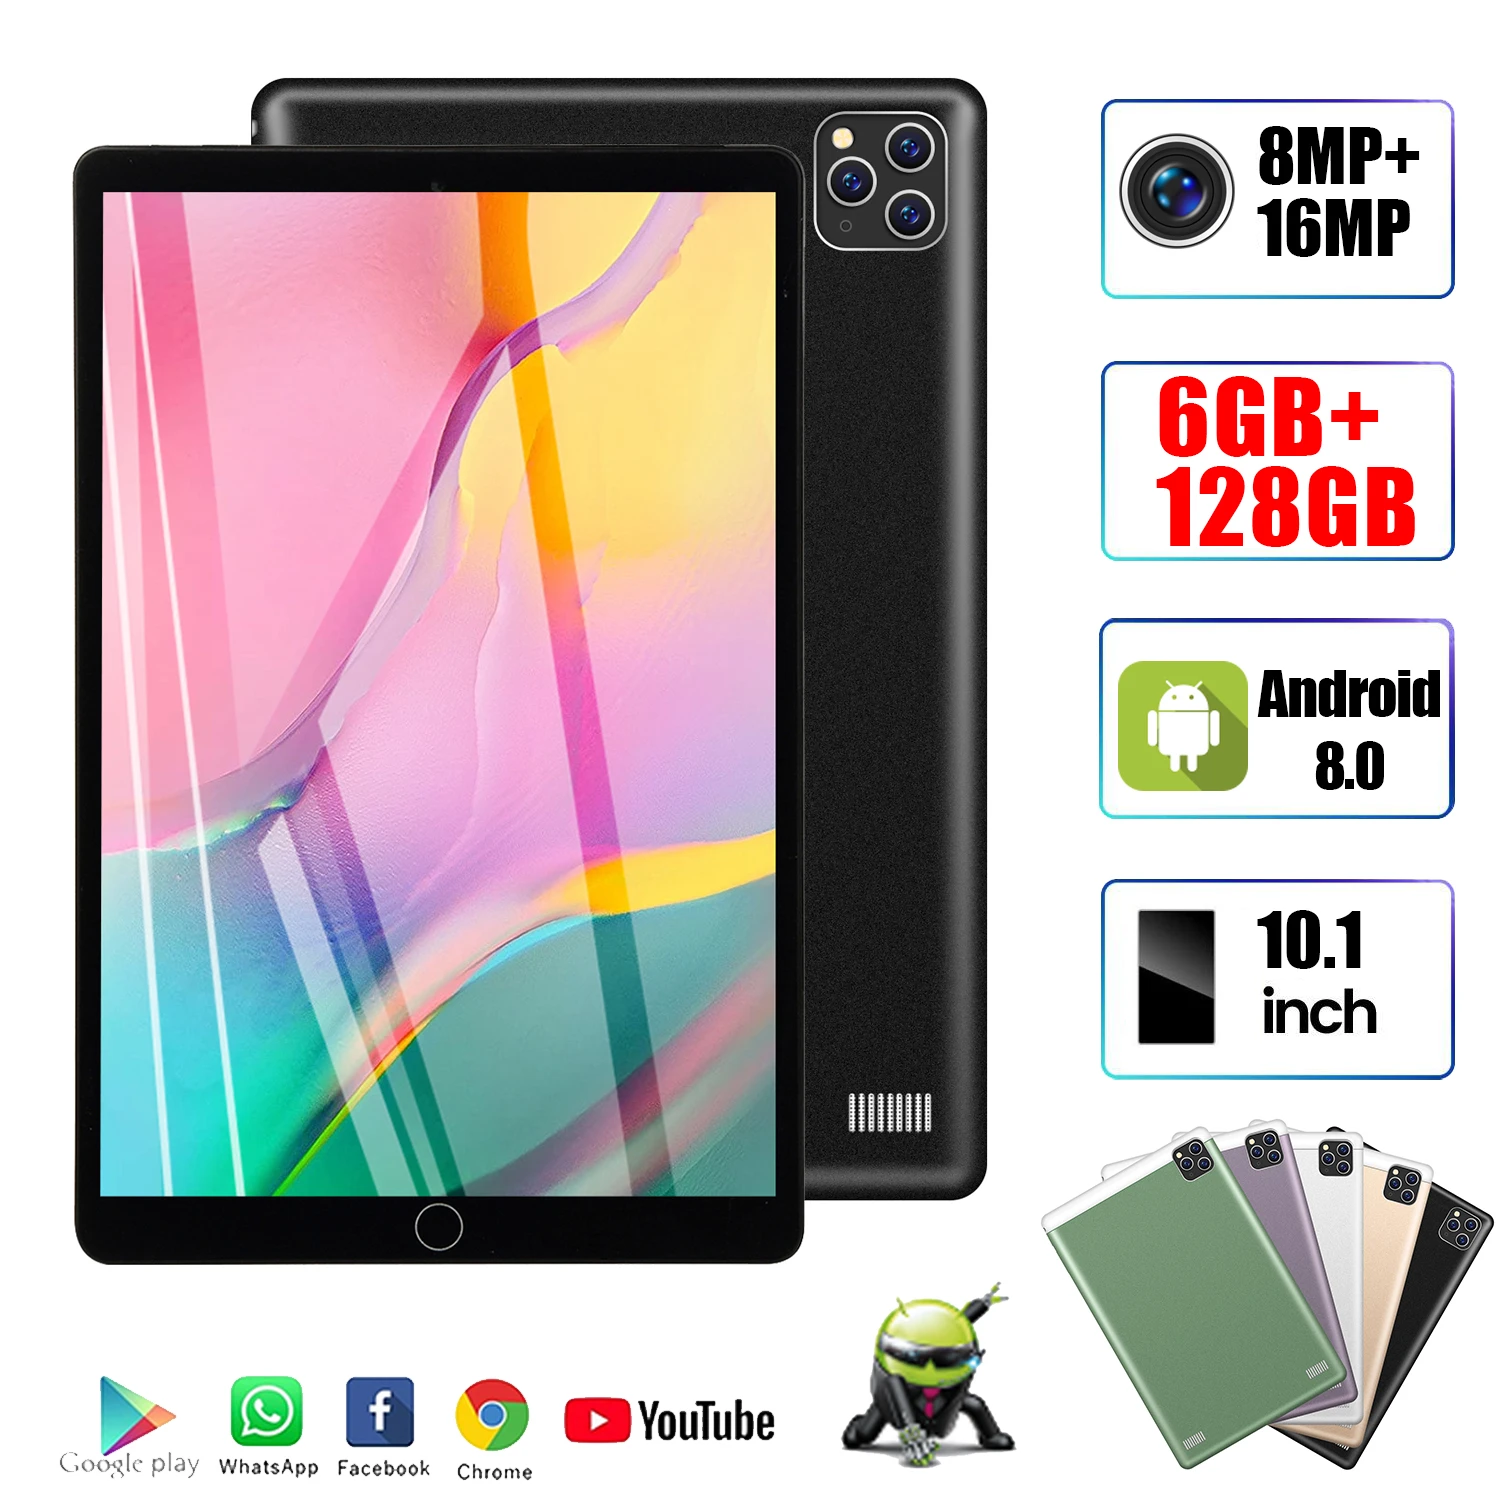 Nланшет S11 Android 8.0 Google Play 4G LTE PC GPS WiFi Bluetooth 6GB RAM 128GB ROM 10Core New Tablet WPS 5G Wifi 10.1 Inch Pad most popular android tablets